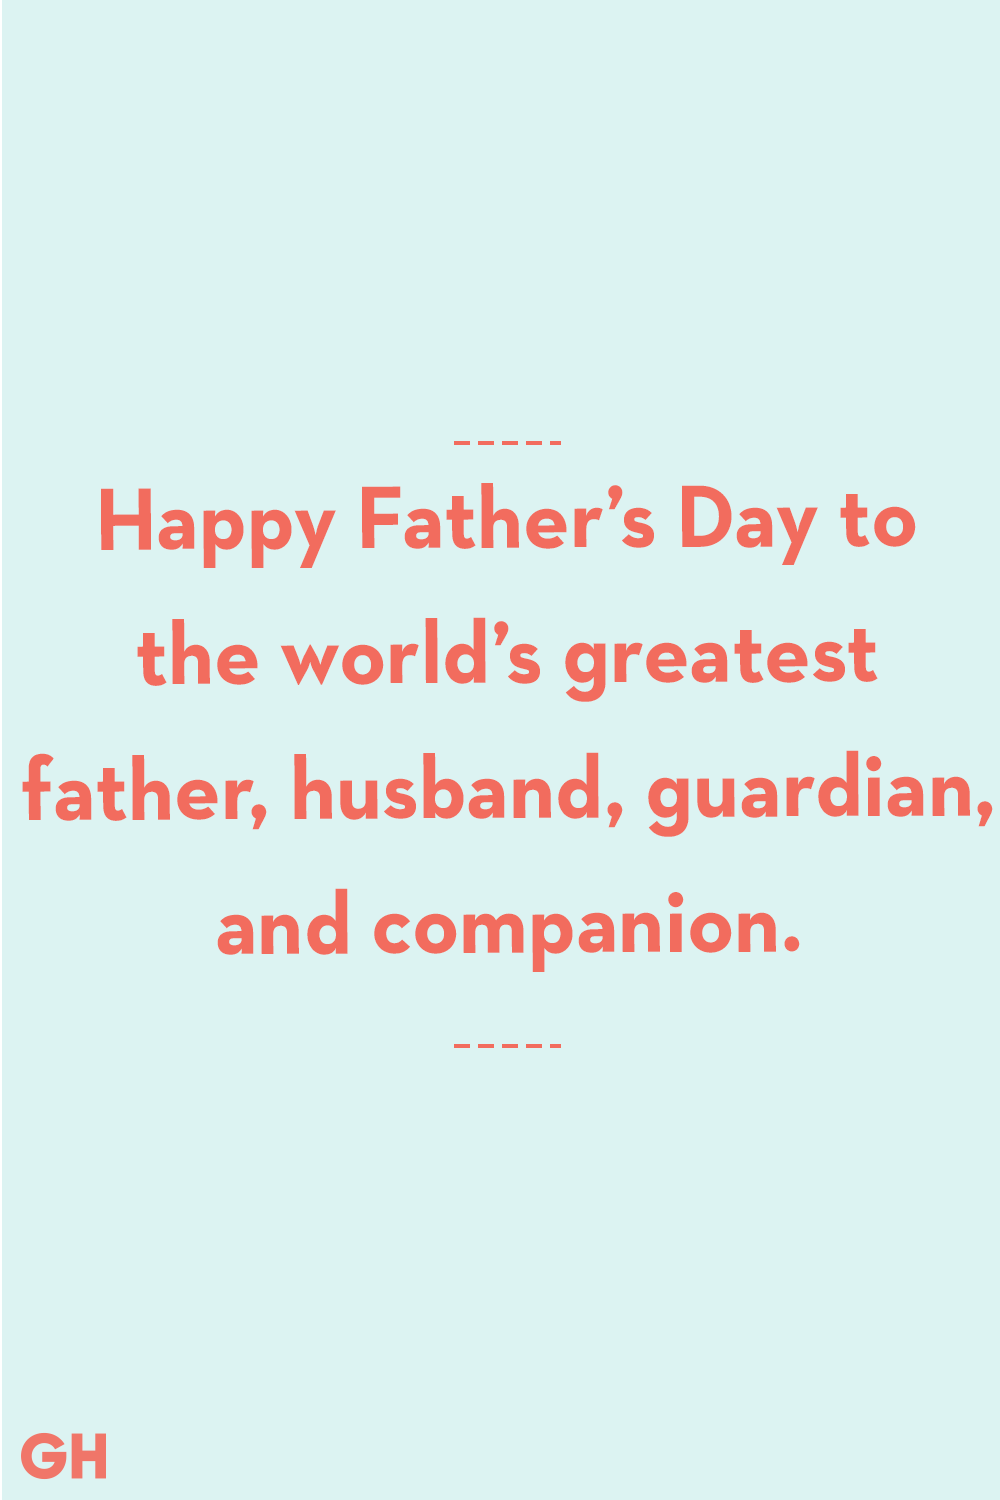 Fathers Day Message To Husband 2020